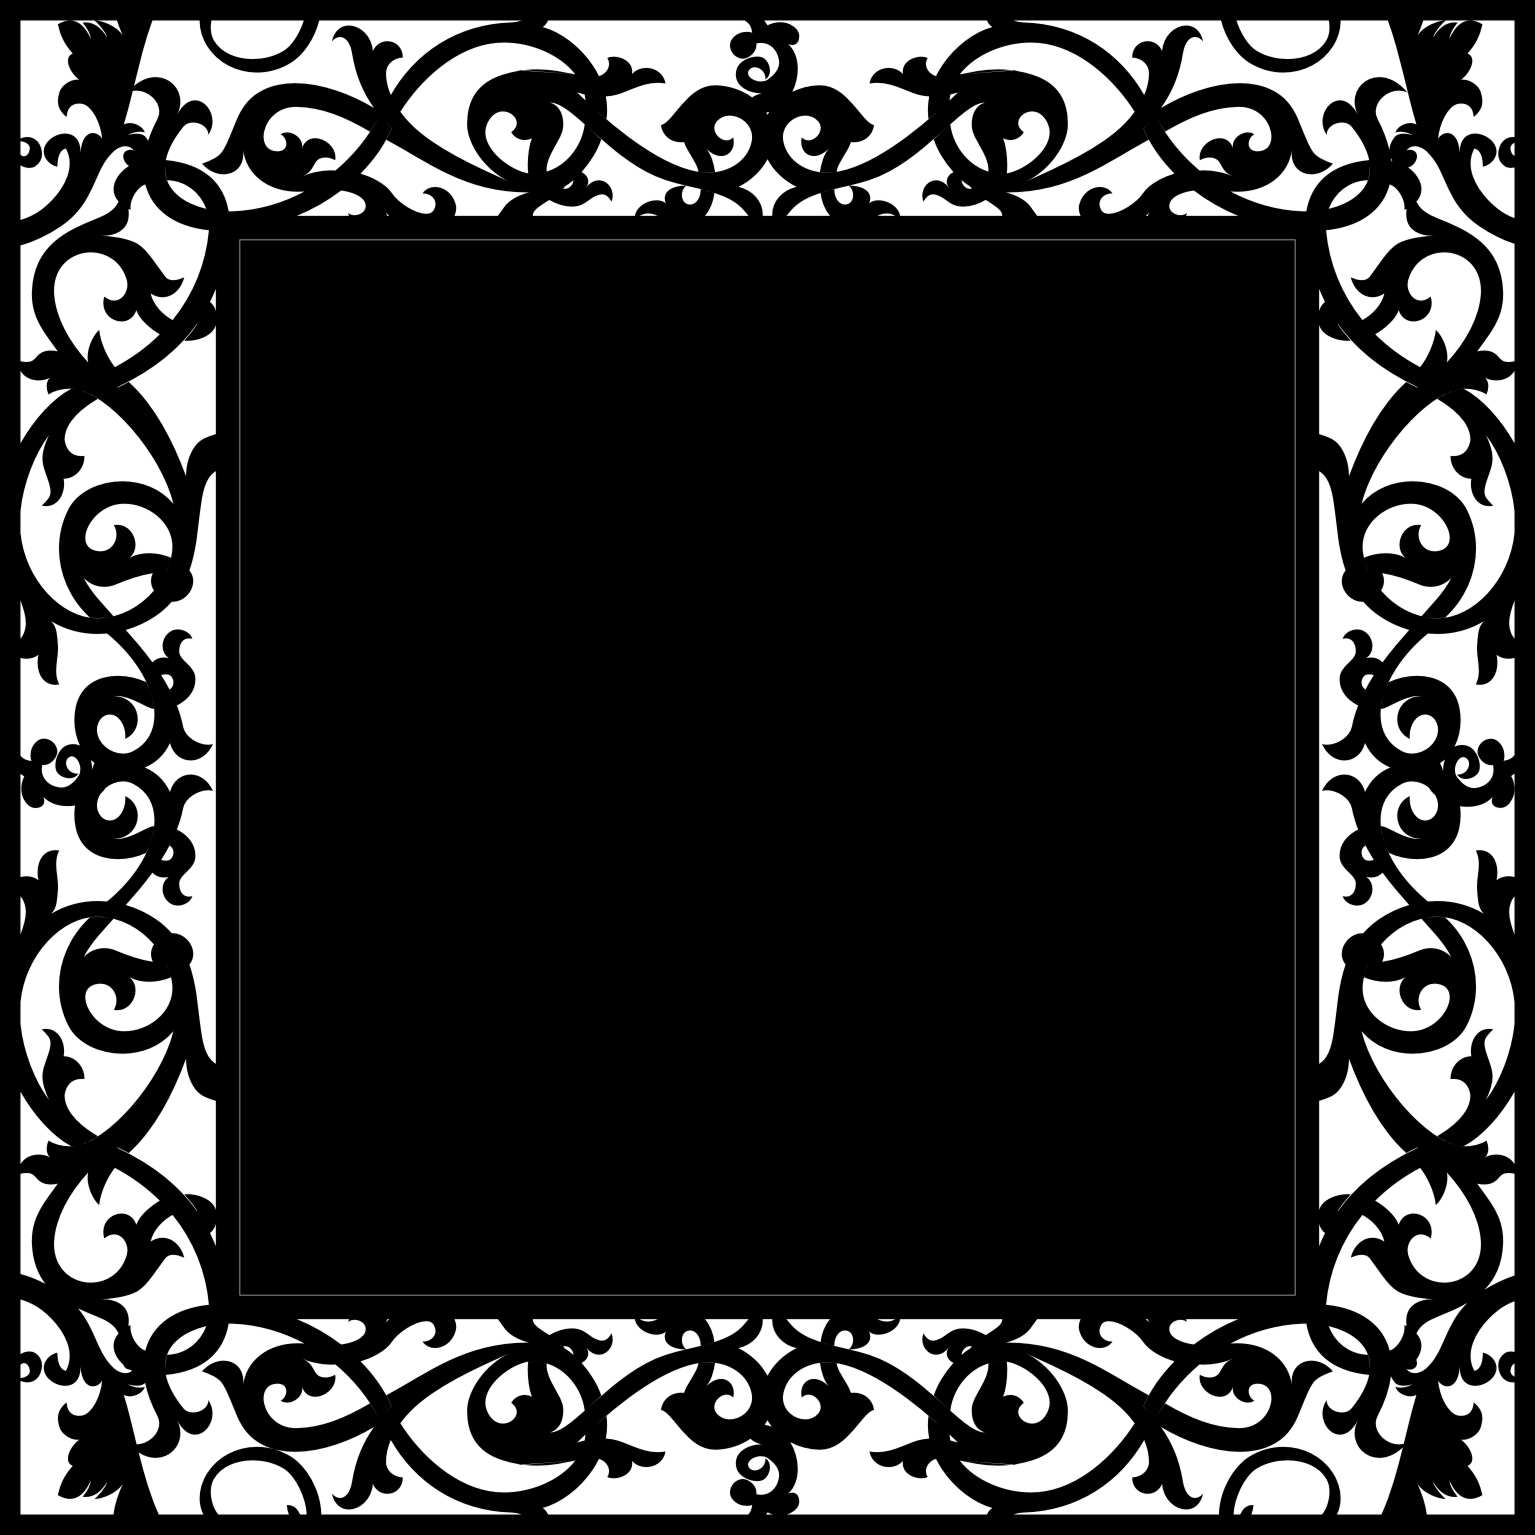 12 x 12 Wrought Iron 3 Frame sold individually